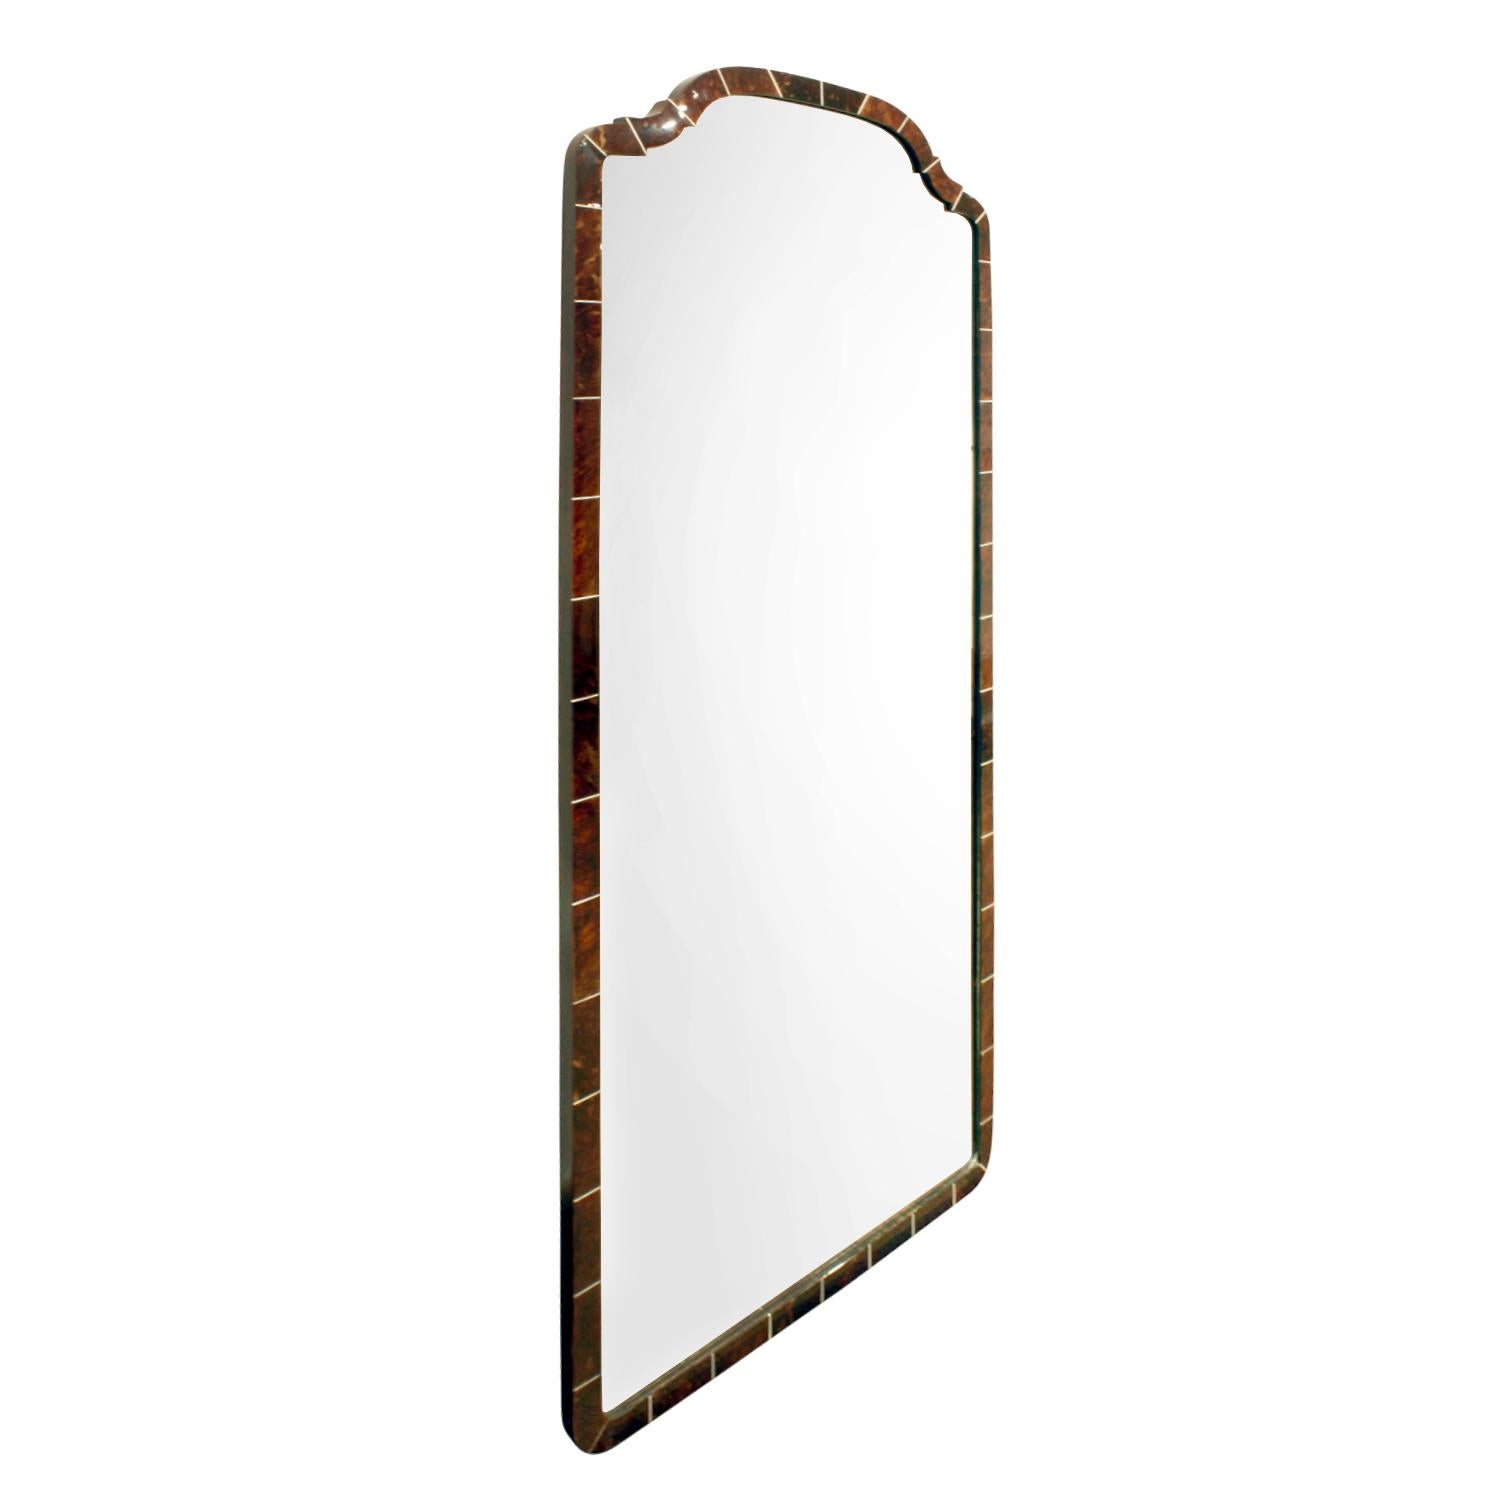 Art Deco studio crafted mirror in tortoiseshell with bone inlays, France, 1930s. This mirror is beautifully made.